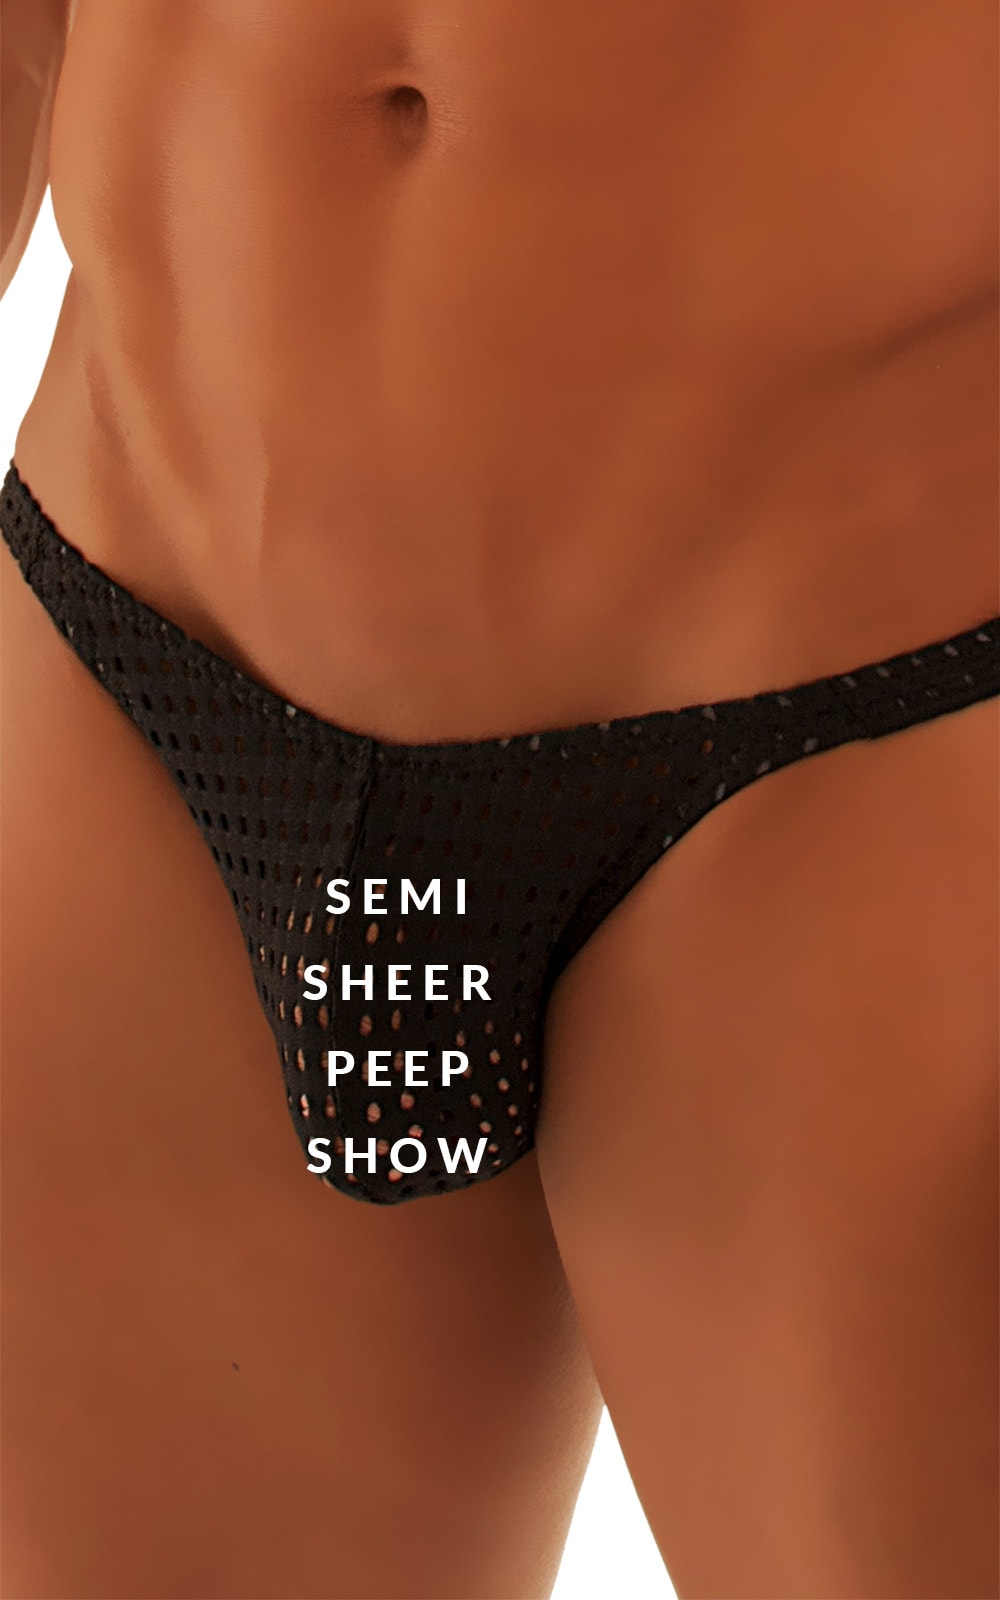 Fitted Bikini Bathing Suit in Black Peep Show, Front Alternative